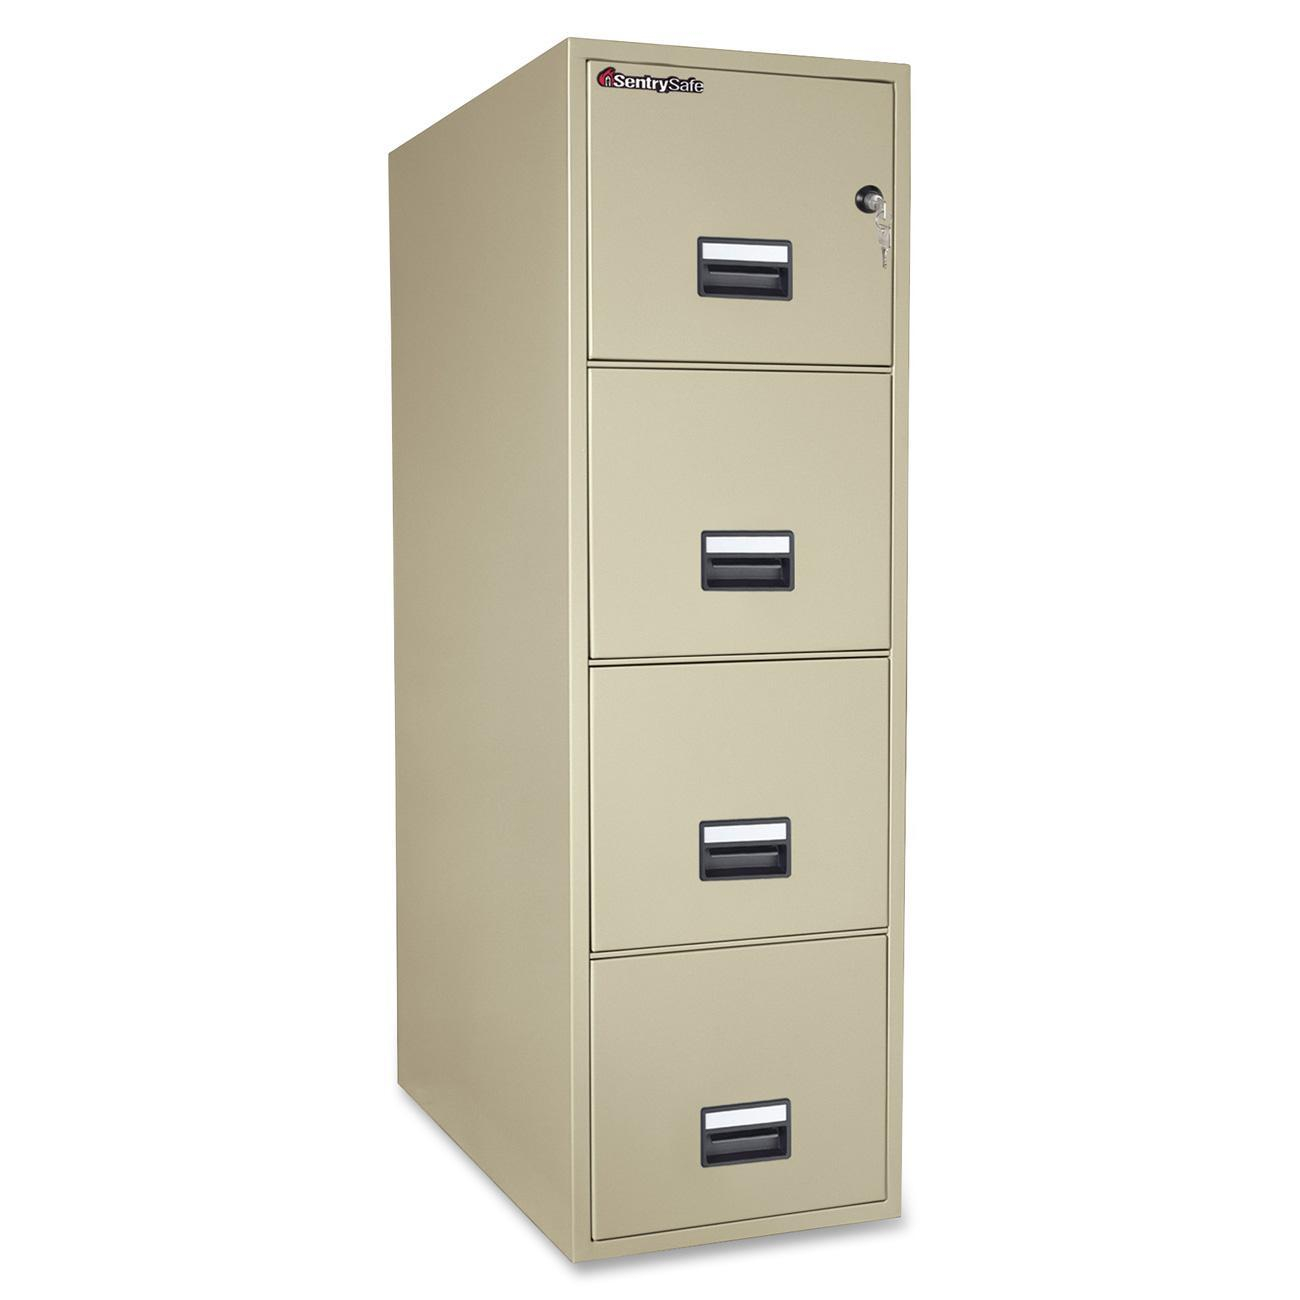 Sentry Safe Vertical Fire File Cabinet Sen4t3131p with regard to dimensions 1300 X 1300